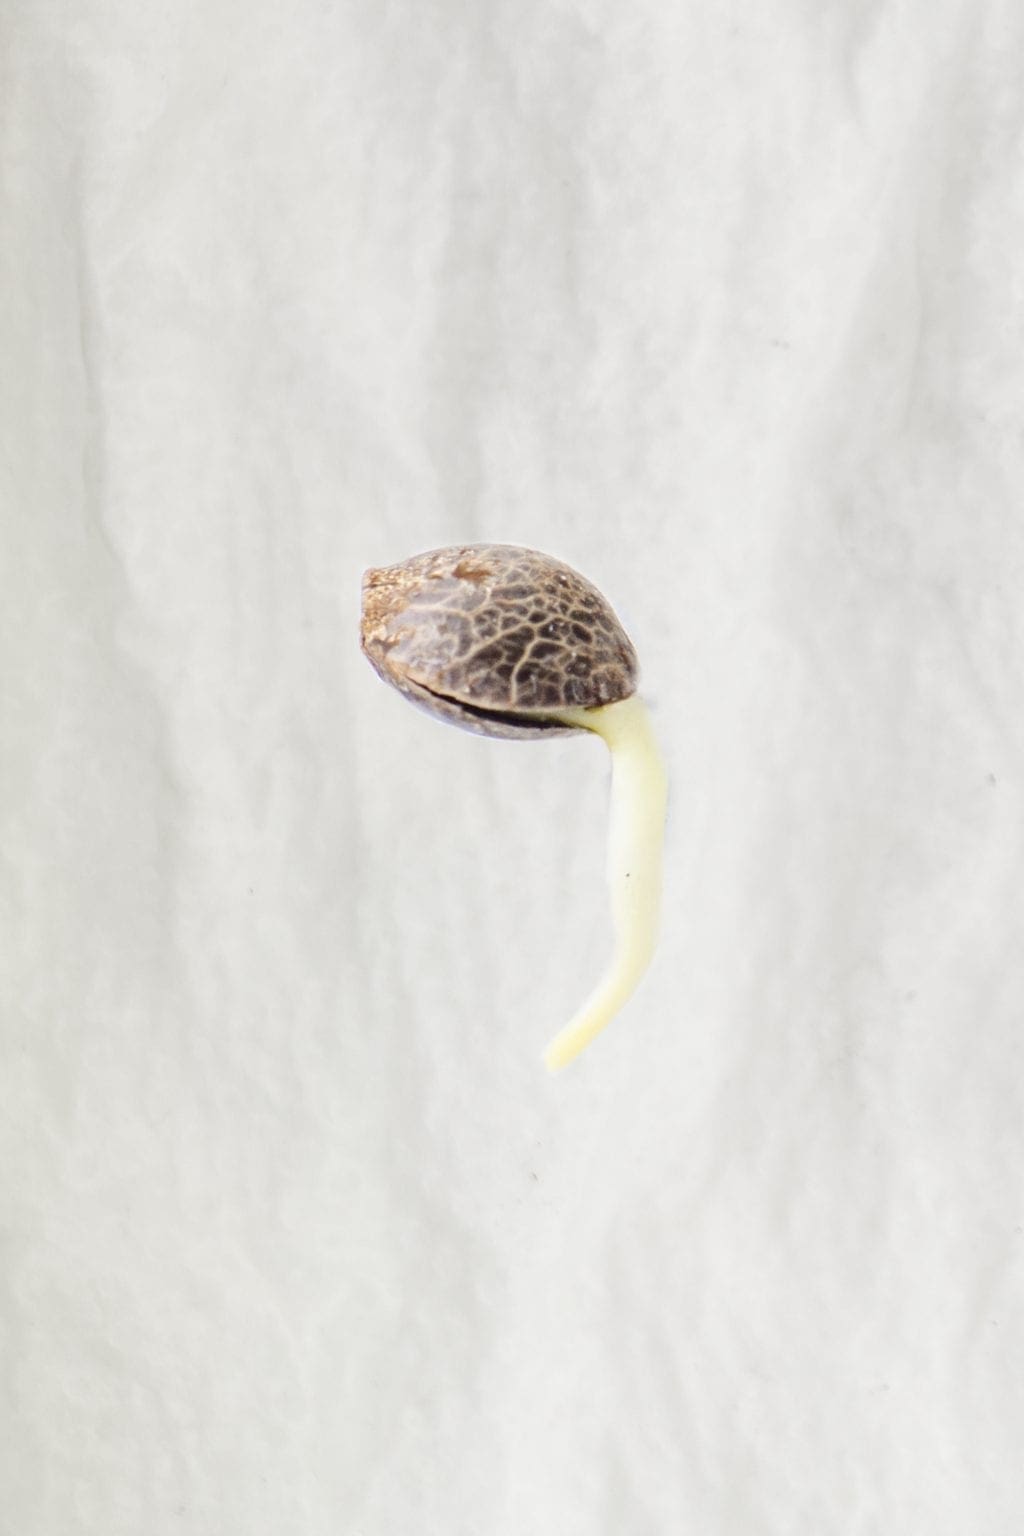 cannabis seed germination tap root